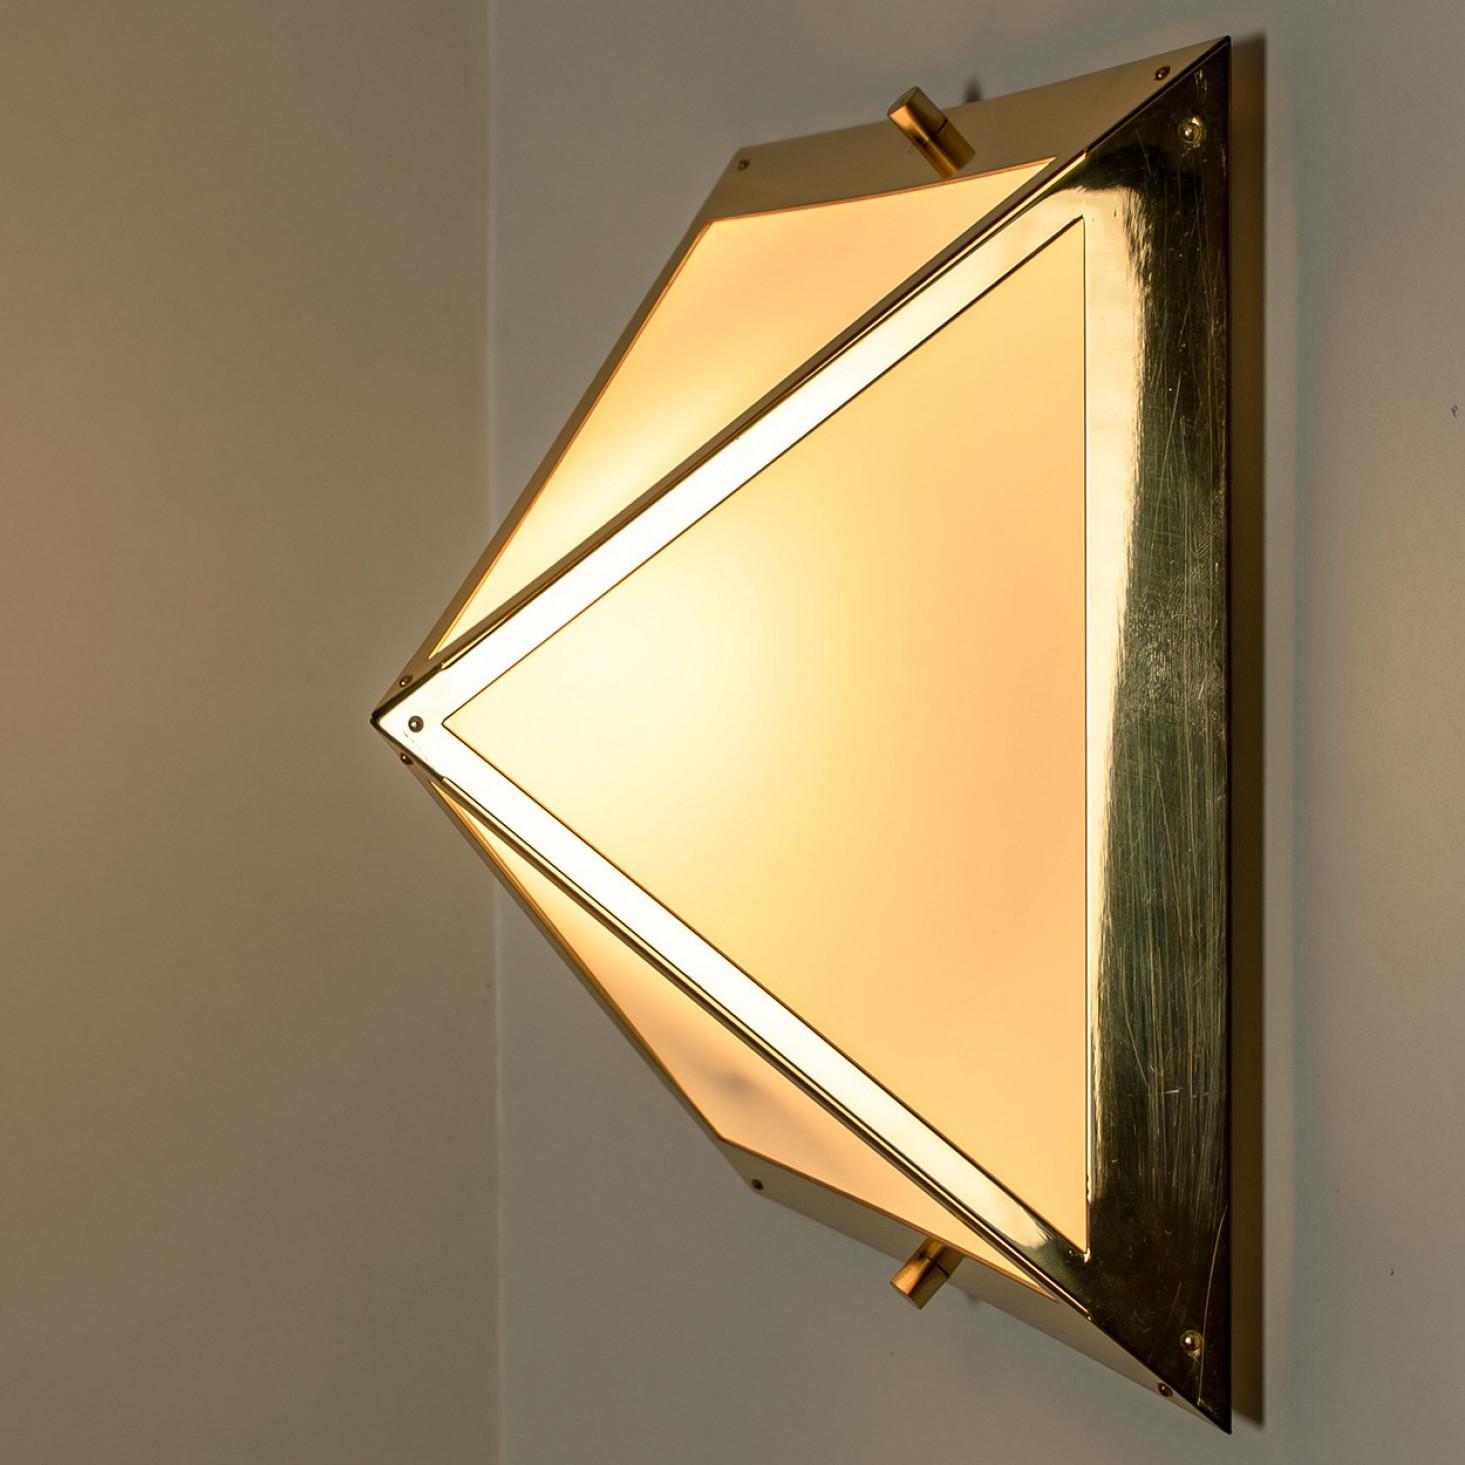 Pyramid White Glass and Brass Wall Lights by Glashütte Limburg, 1970s For Sale 3